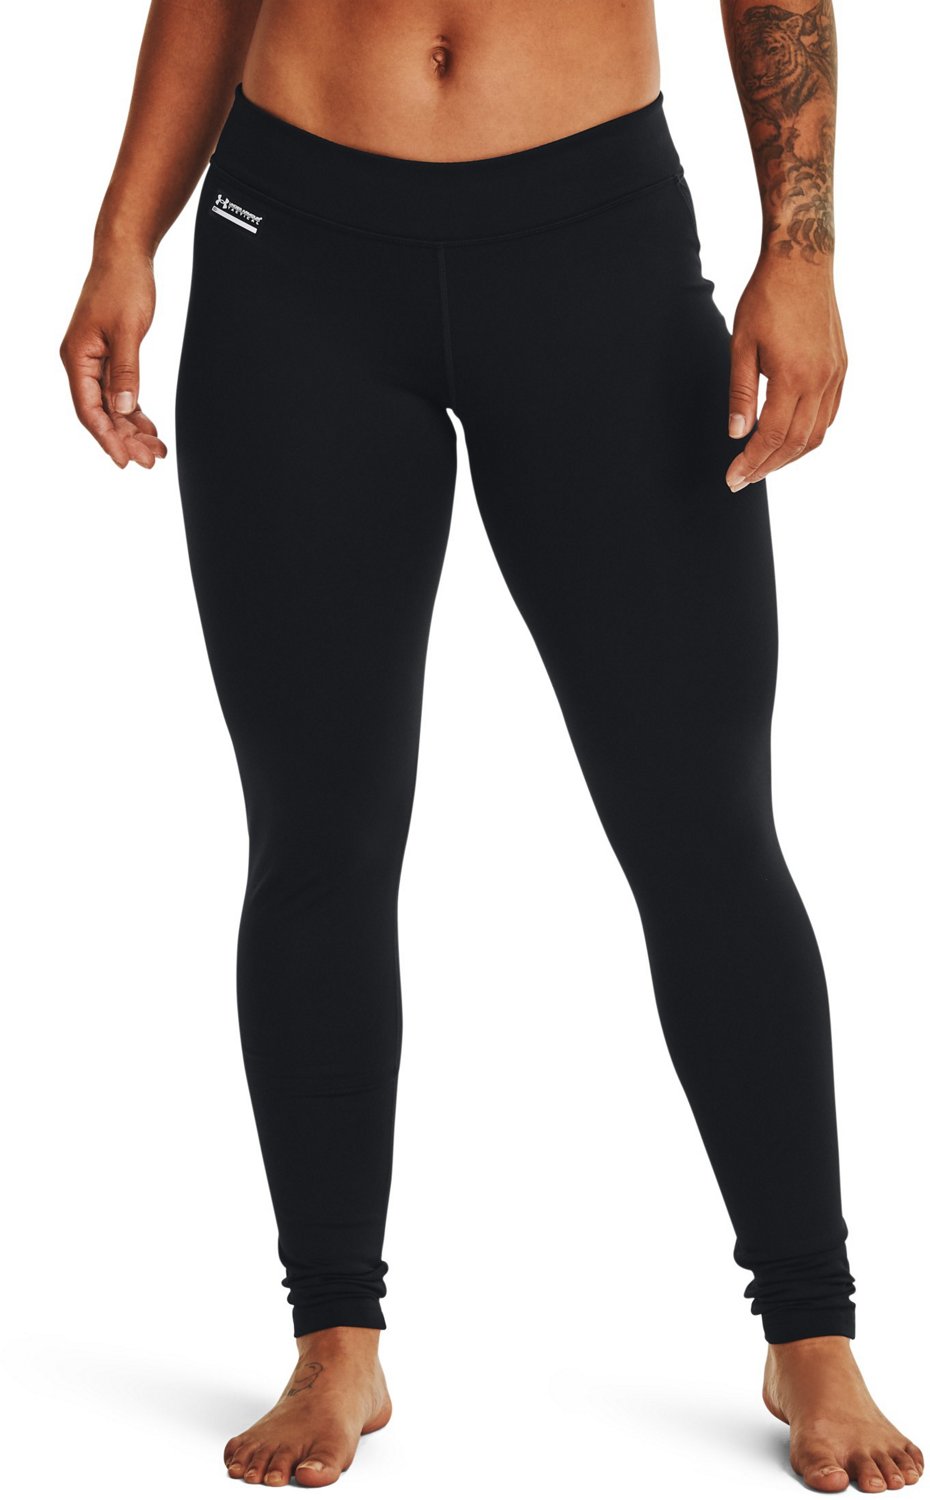 Under Armour Women's Tactical ColdGear Infrared Base Leggings 29